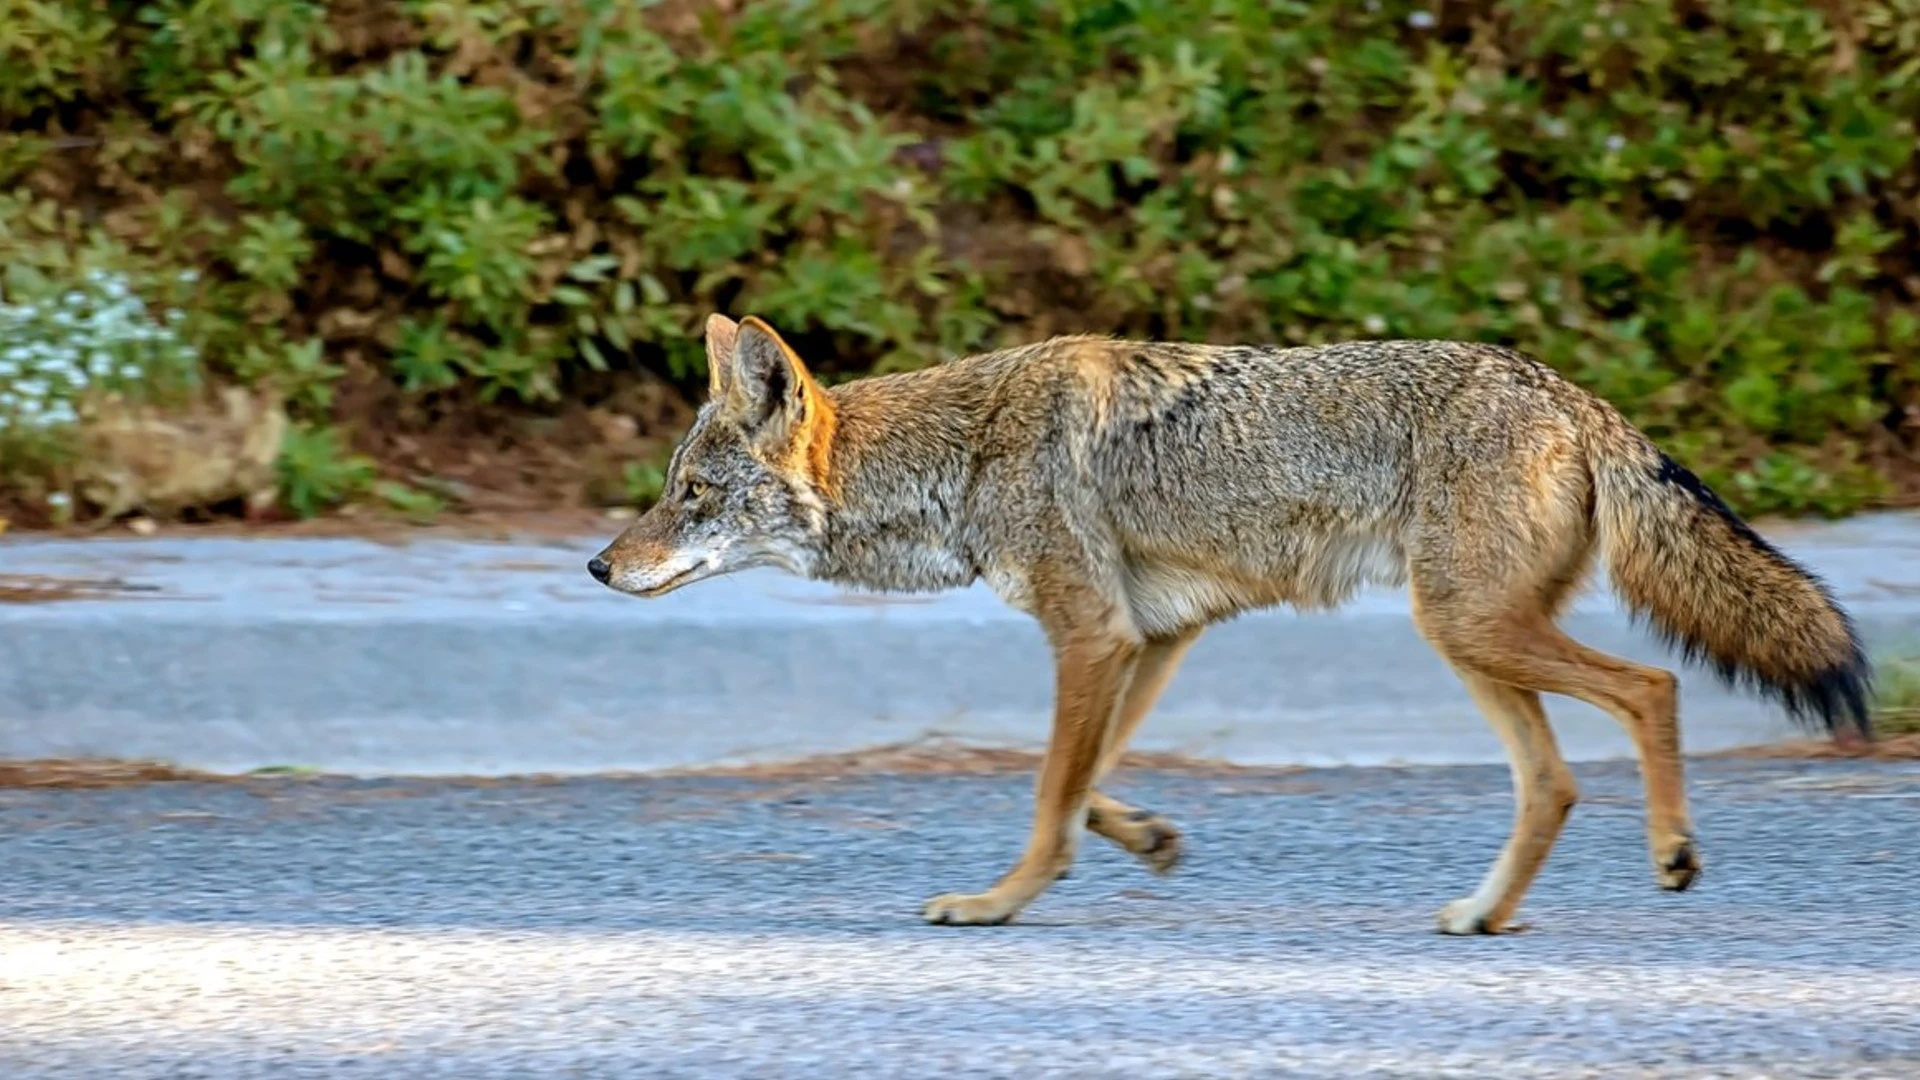 Grocery store worker, Coyote attack, Bay Area incidents, Human-wildlife conflict, 1920x1080 Full HD Desktop